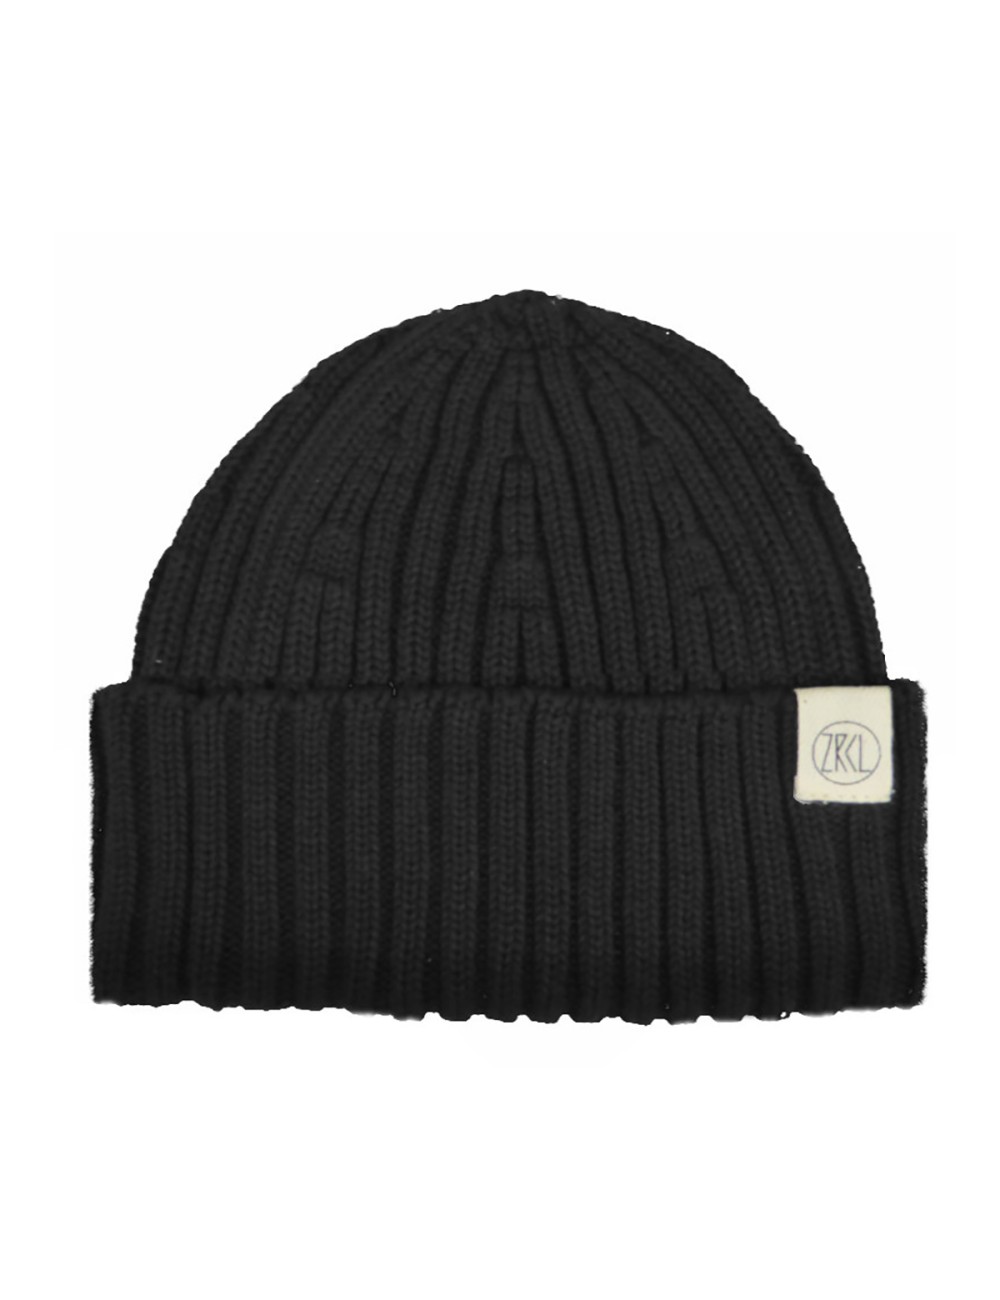 ZRCL A Beanie Snugly Short SwissEdition - Black